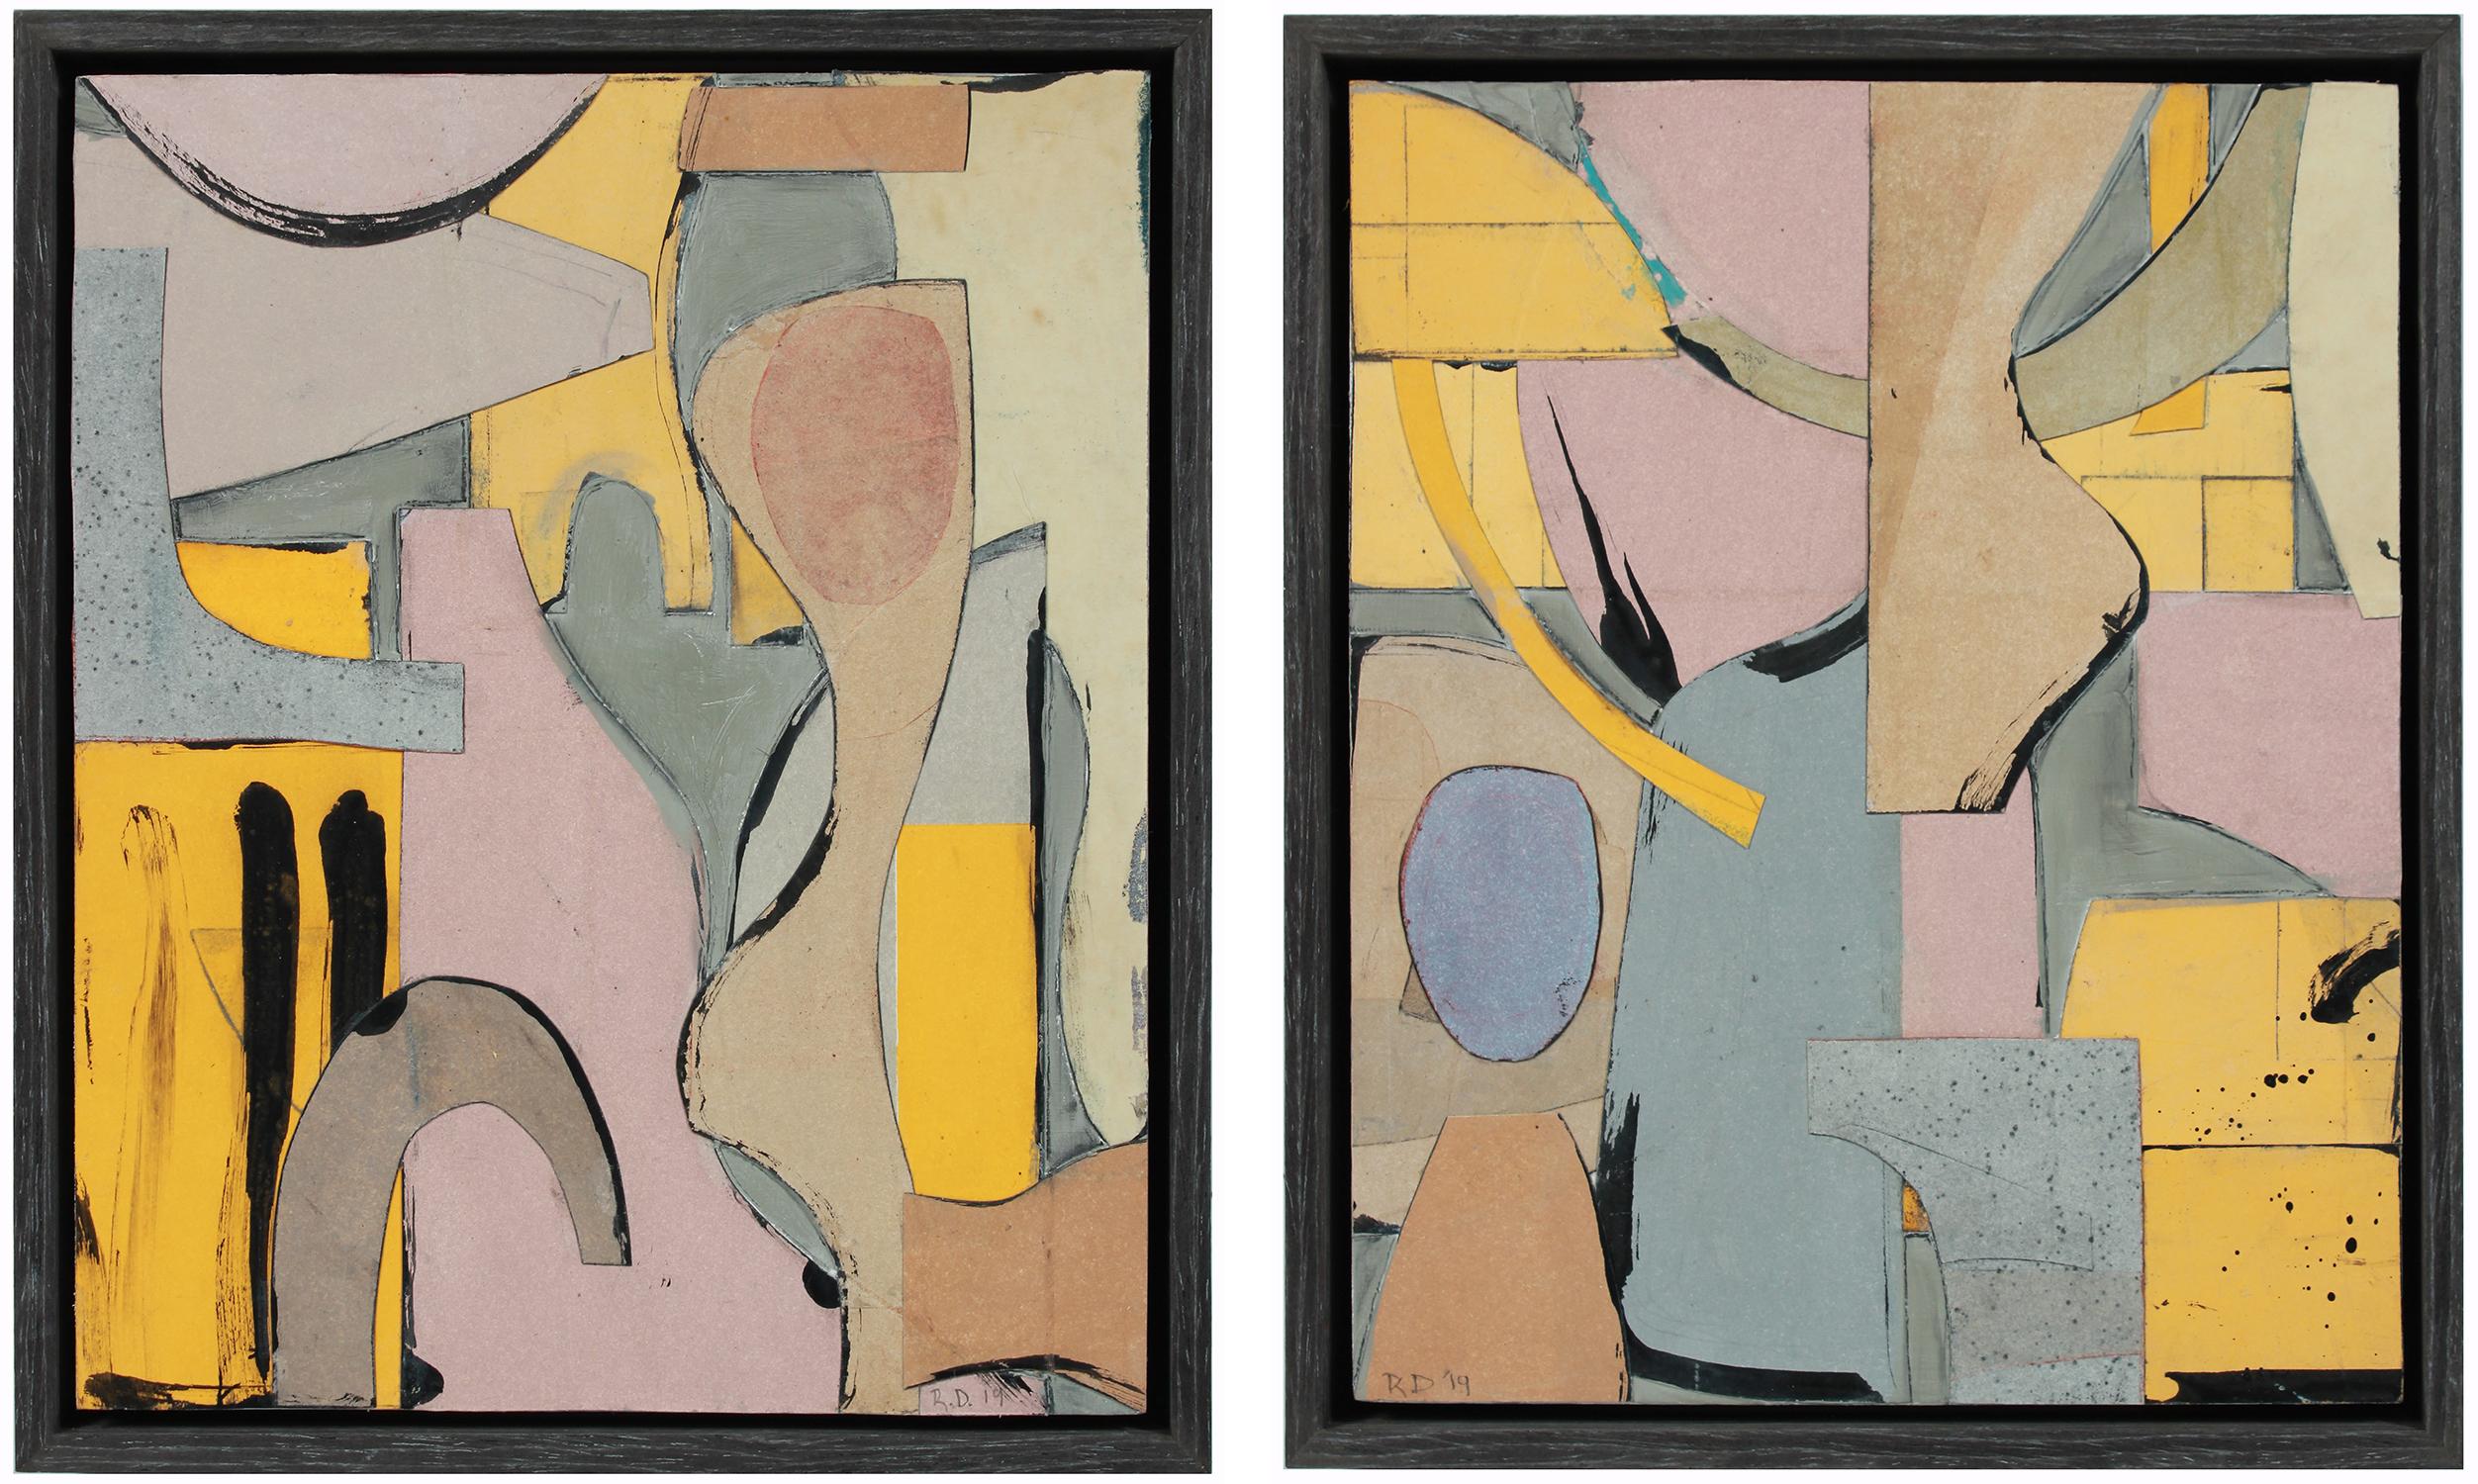 "Floatsam" & "Jetsam" Diptych, Collage on Board Contemporary Abstract, 2019 - Mixed Media Art by Rob Delamater